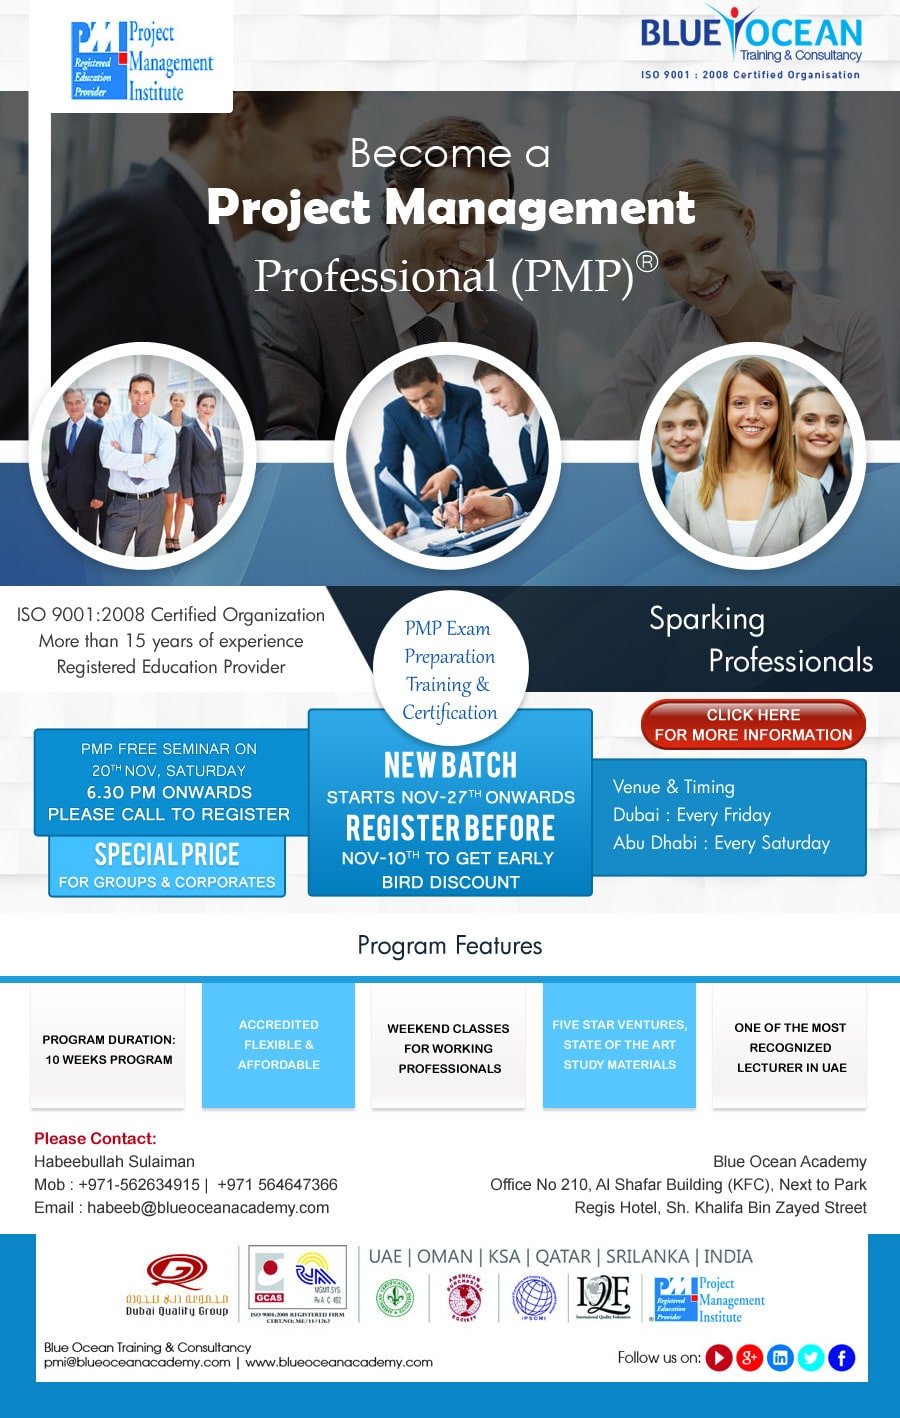 Become a Project Management Professional (PMP)